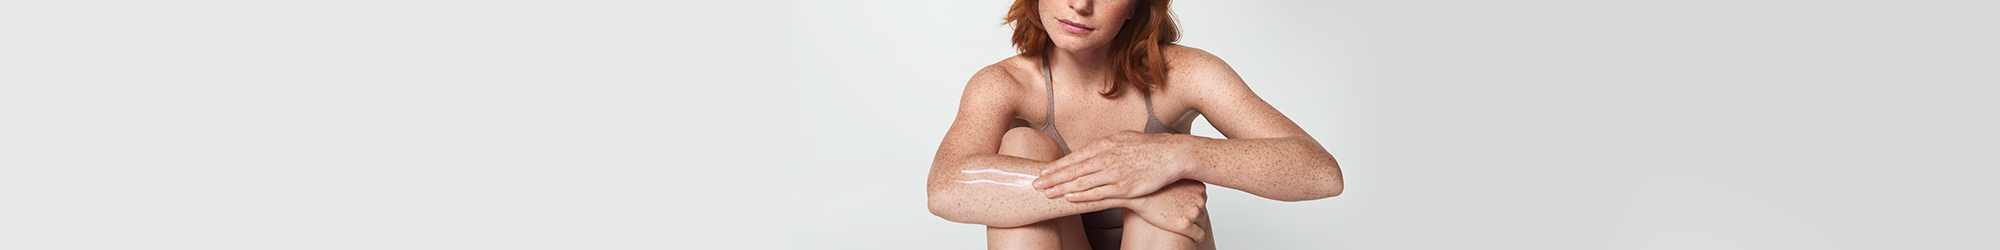 View of a female model with short red hair smearing a cream product along her right arm.